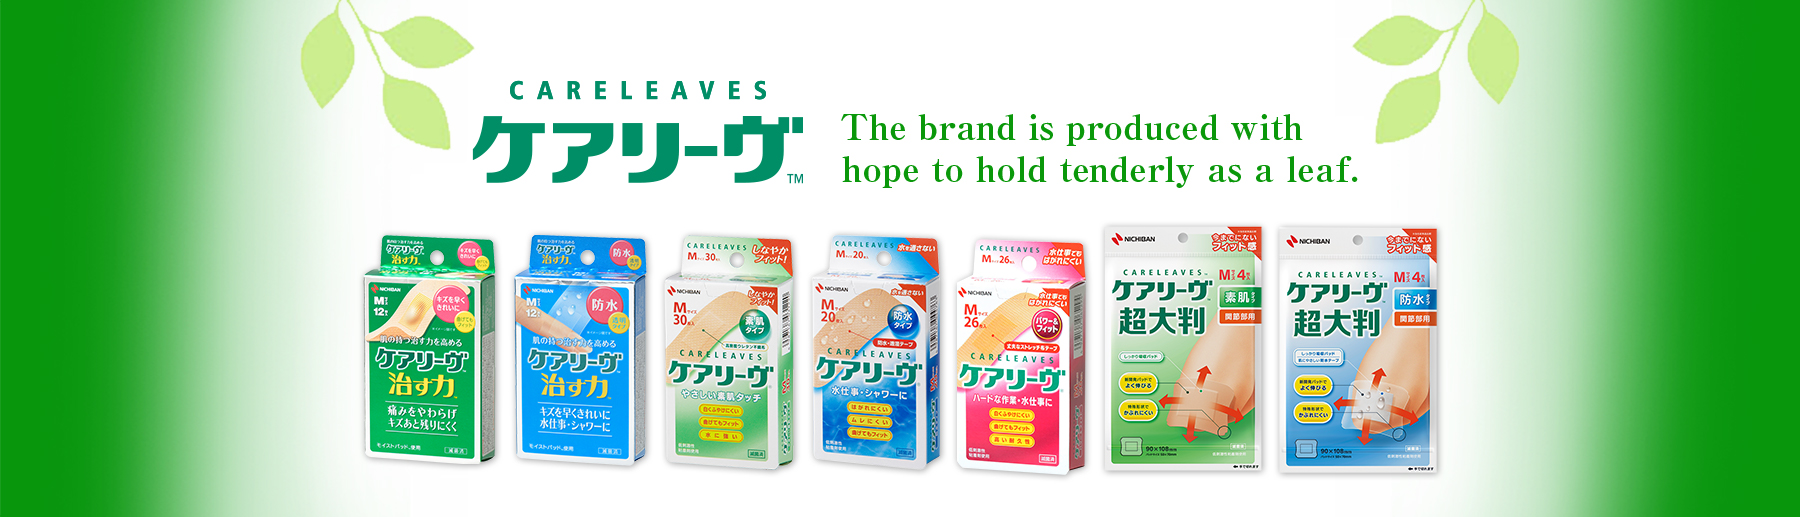 The brand is produced with hope to hold tenderly as a leaf.